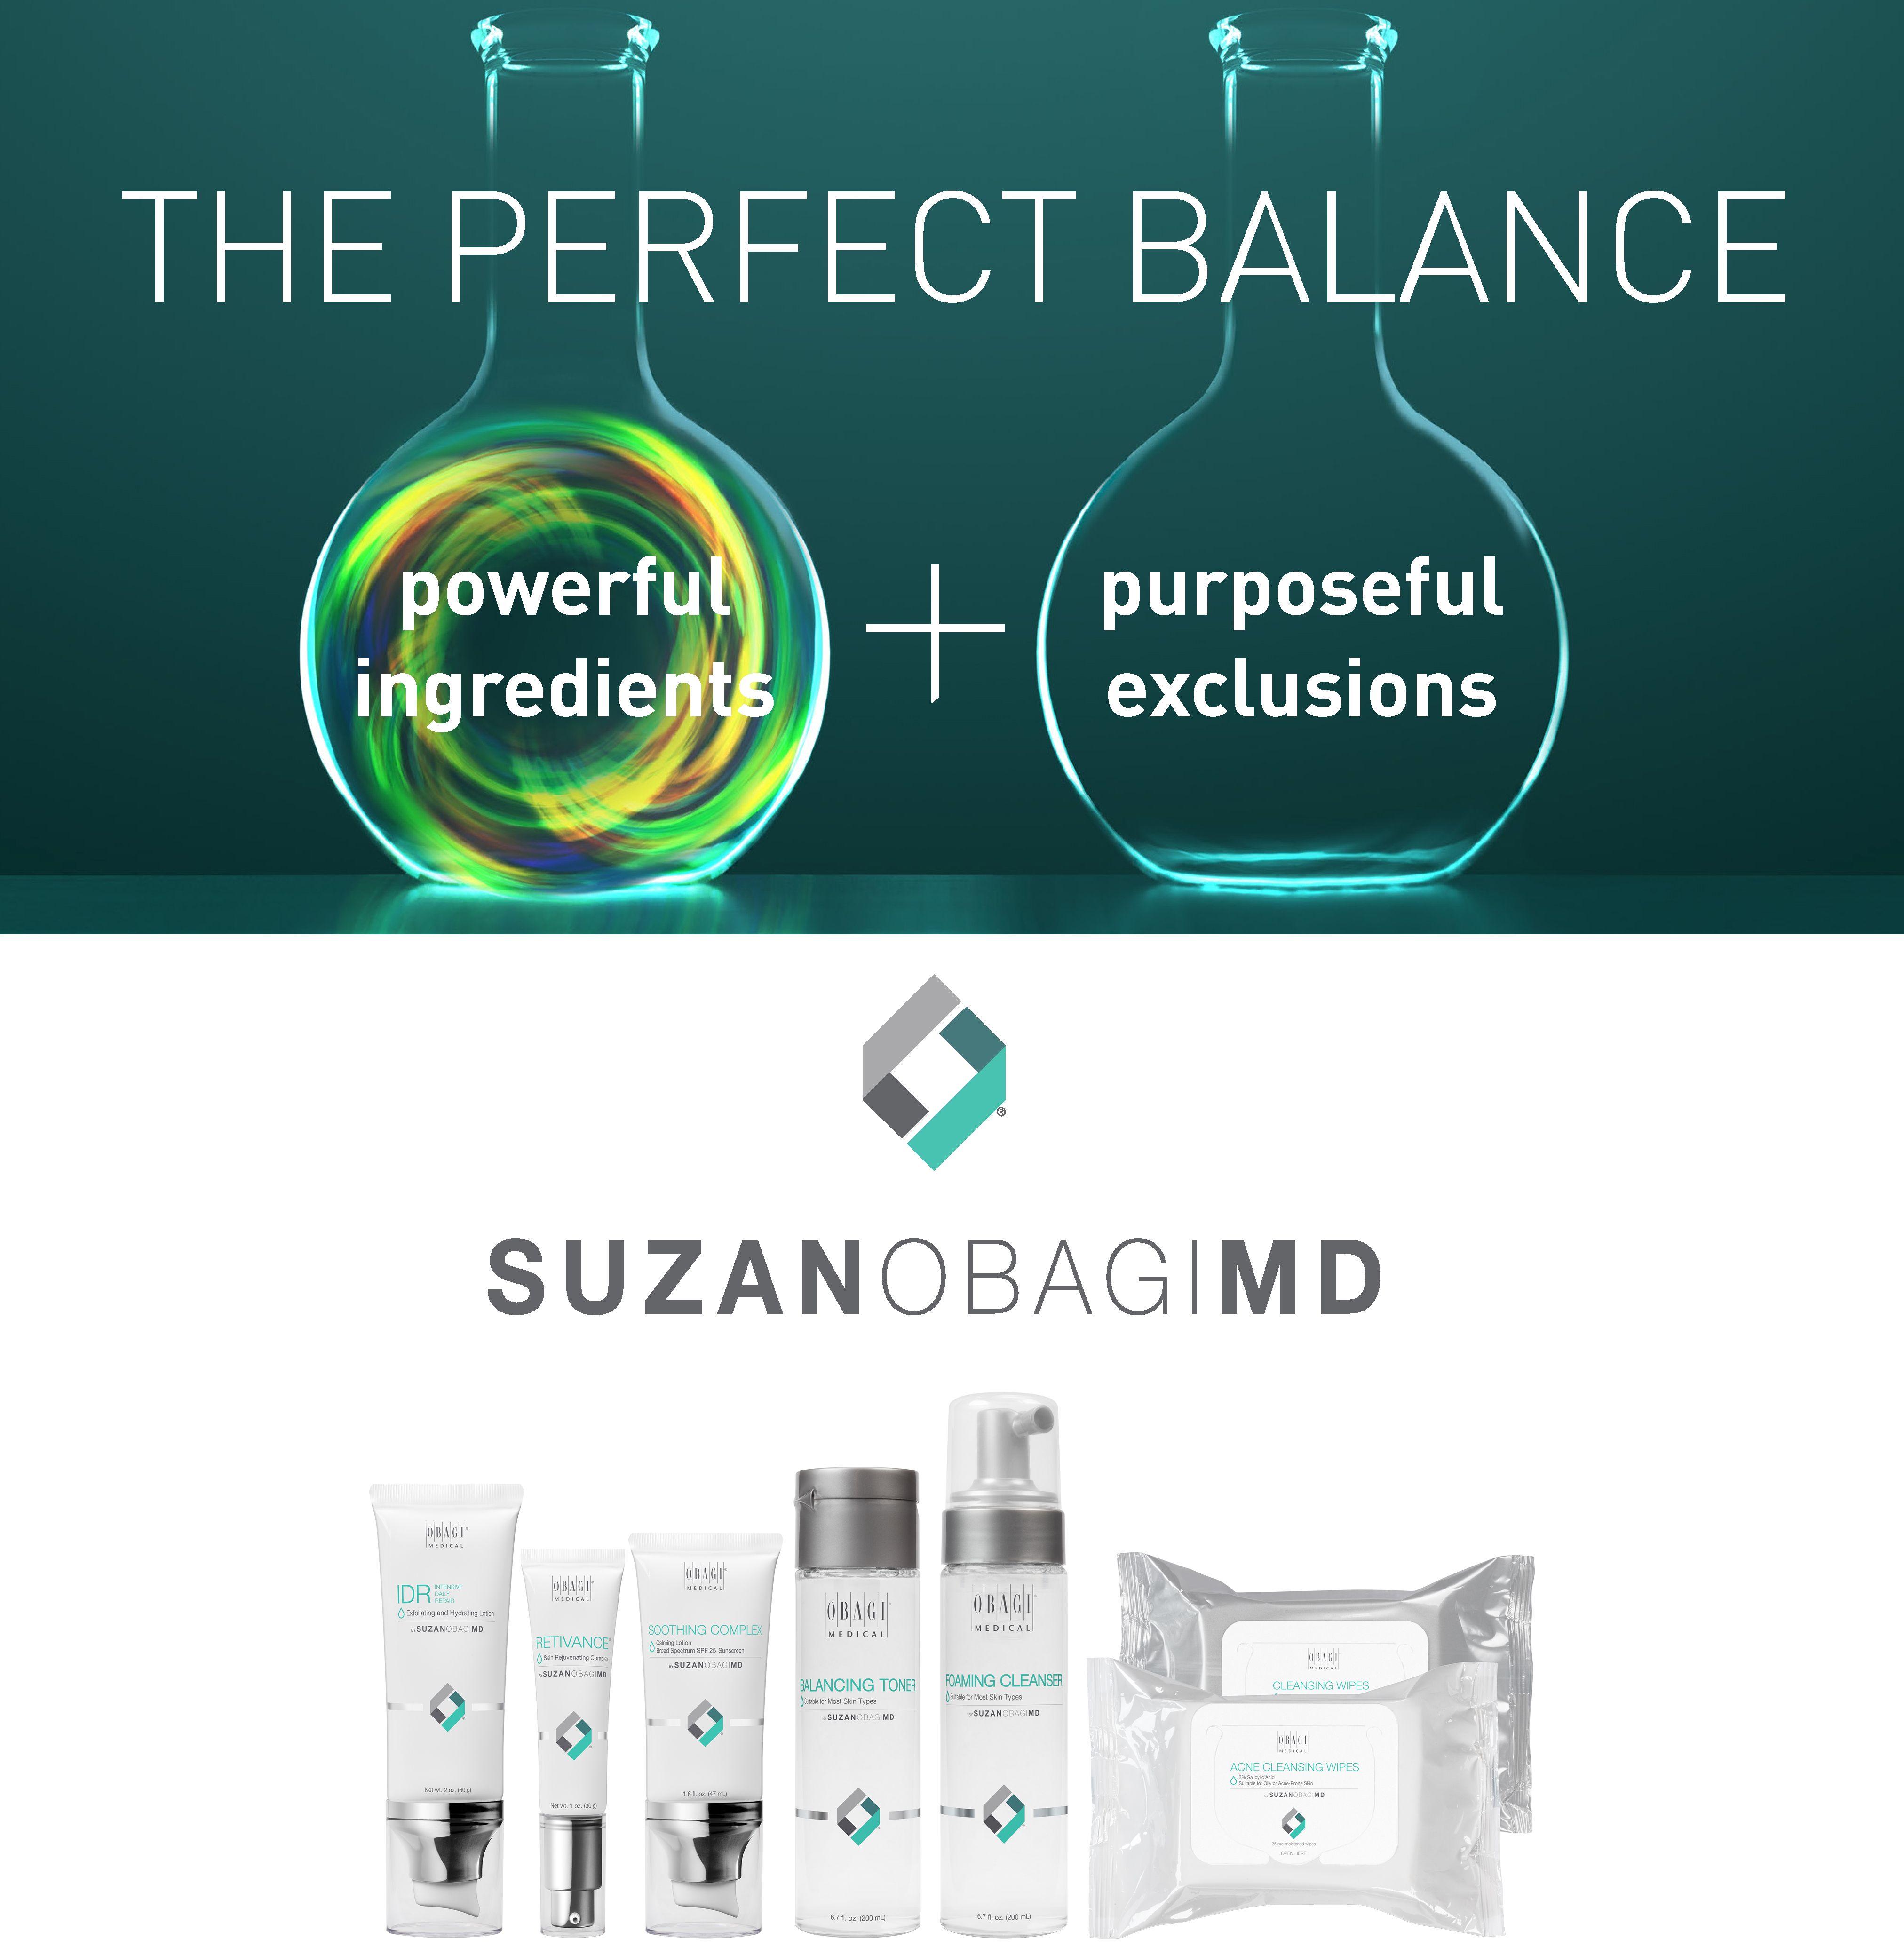 Obagi Logo - Product Preview: Next Generation Skin Care by Dr. Suzan Obagi